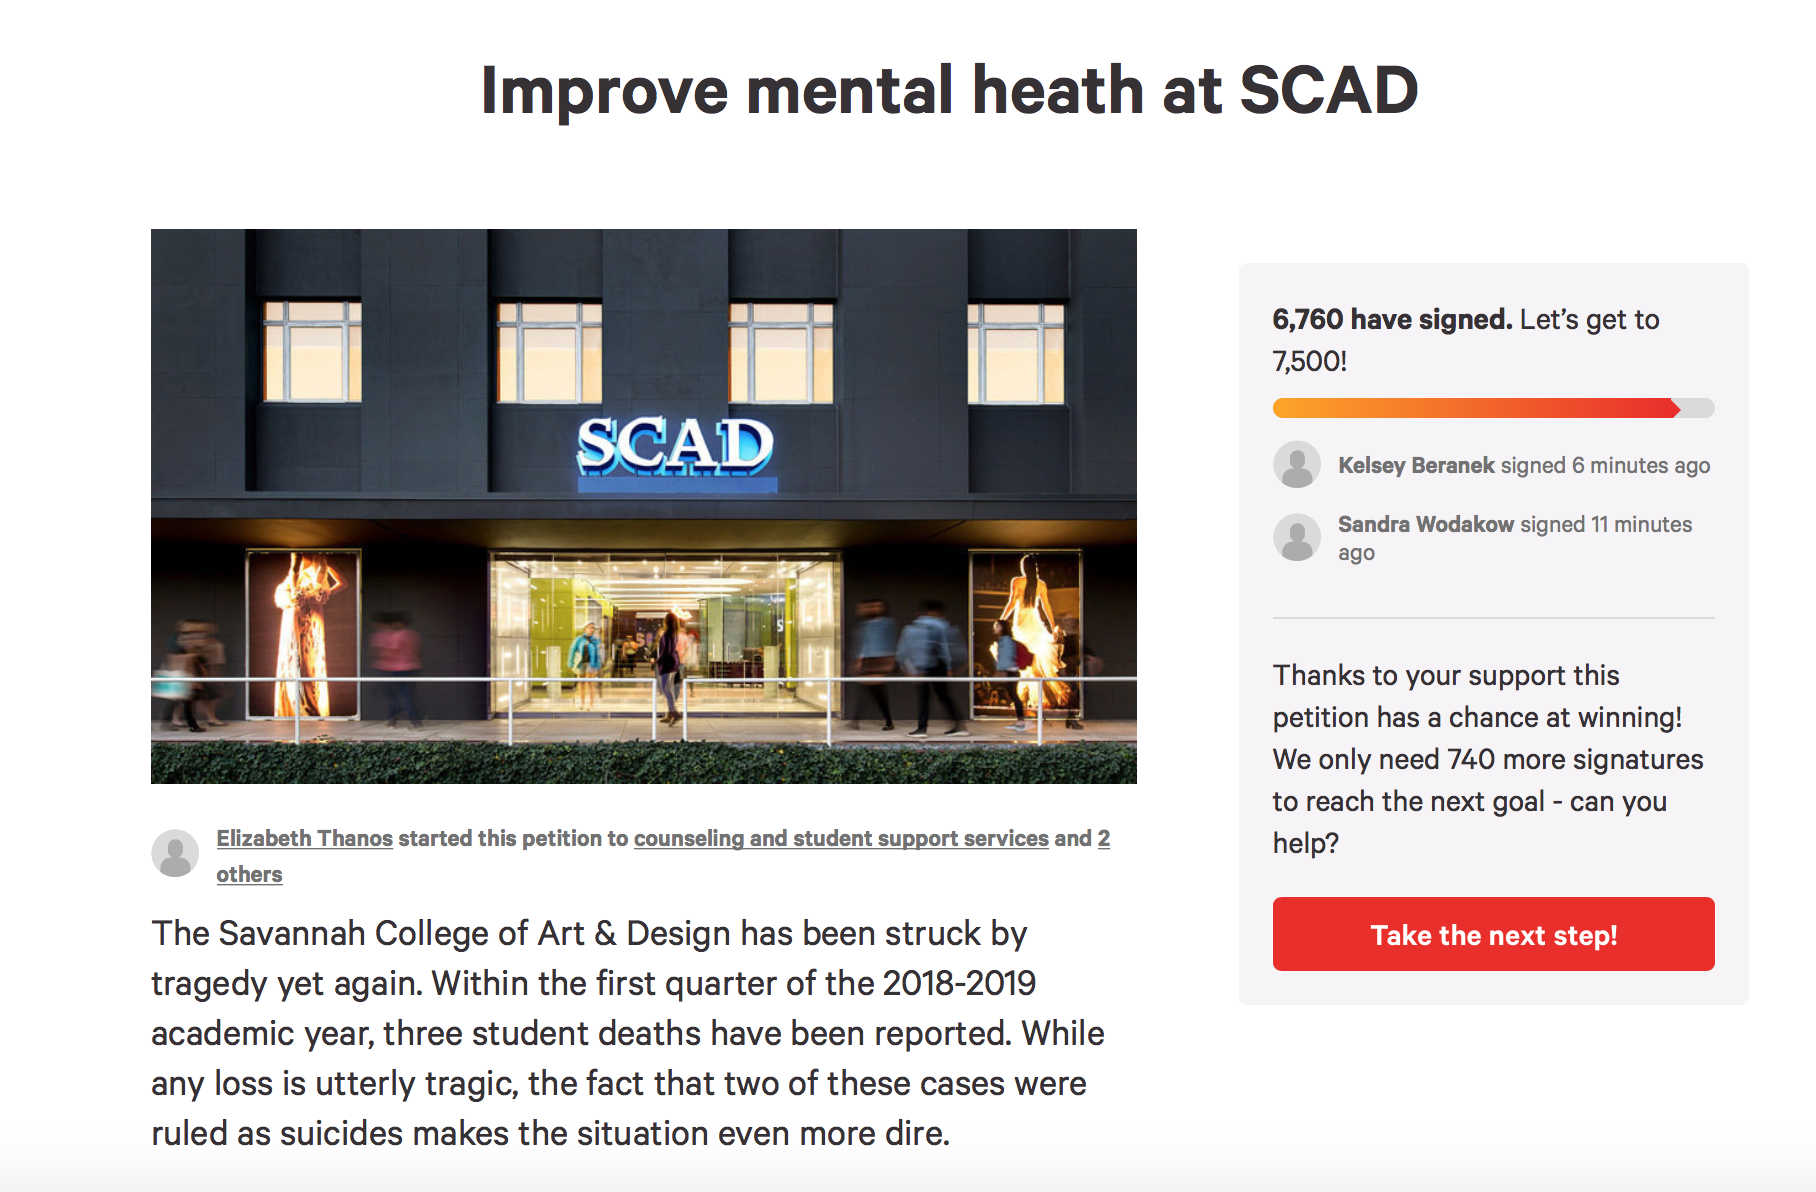 SCAD Mental Health Petition